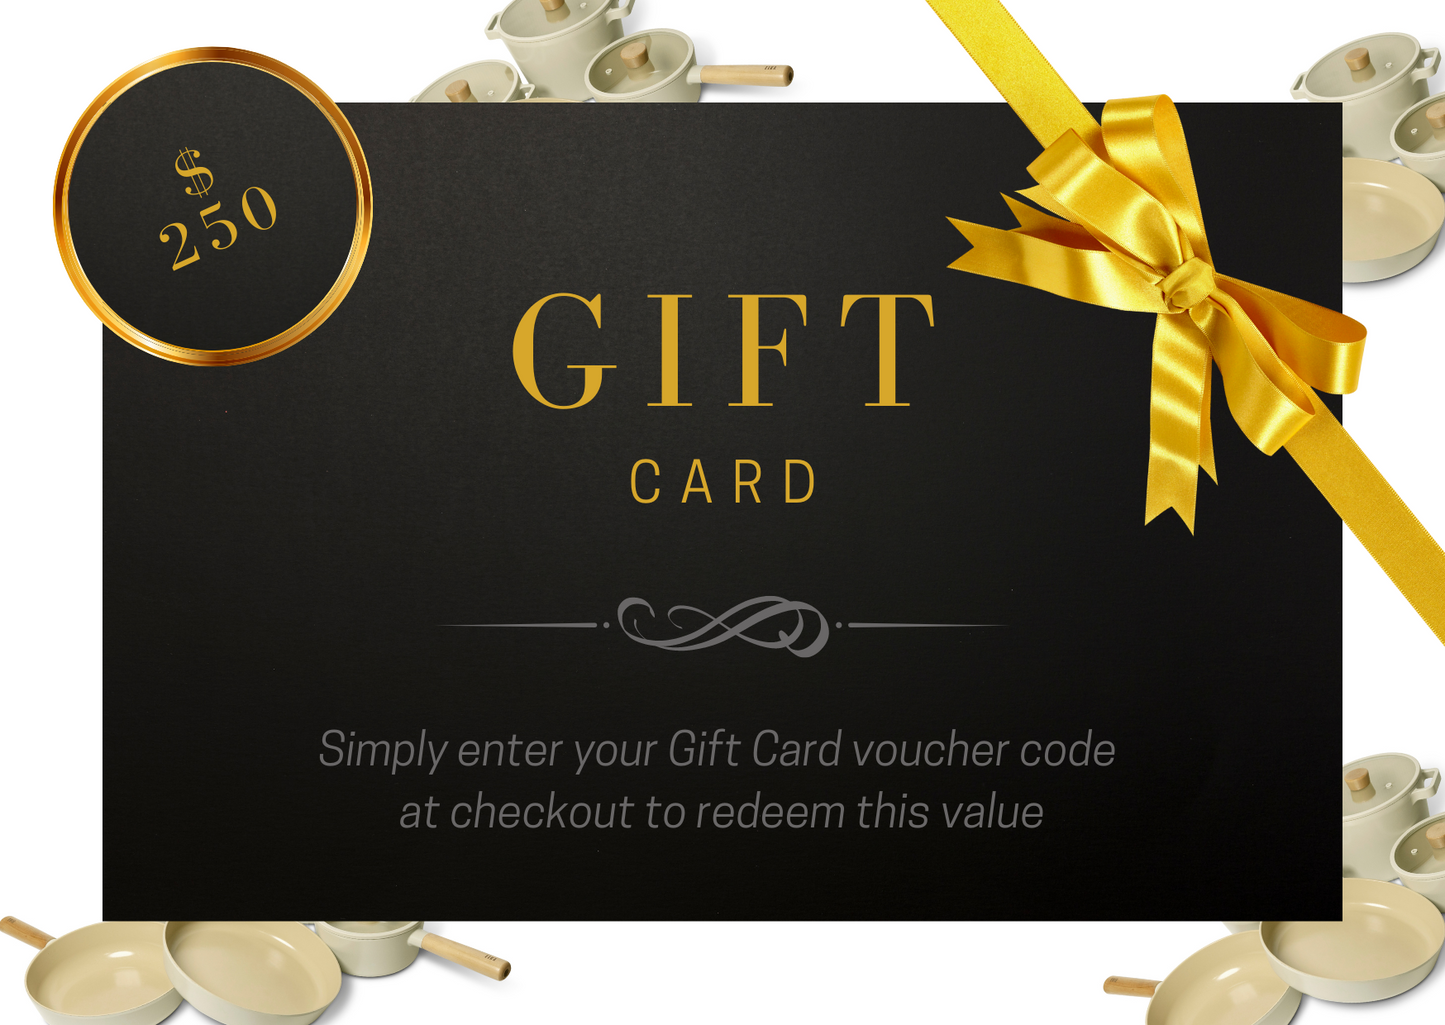 Gift Card -Cook With FIKA Gift Voucher Code